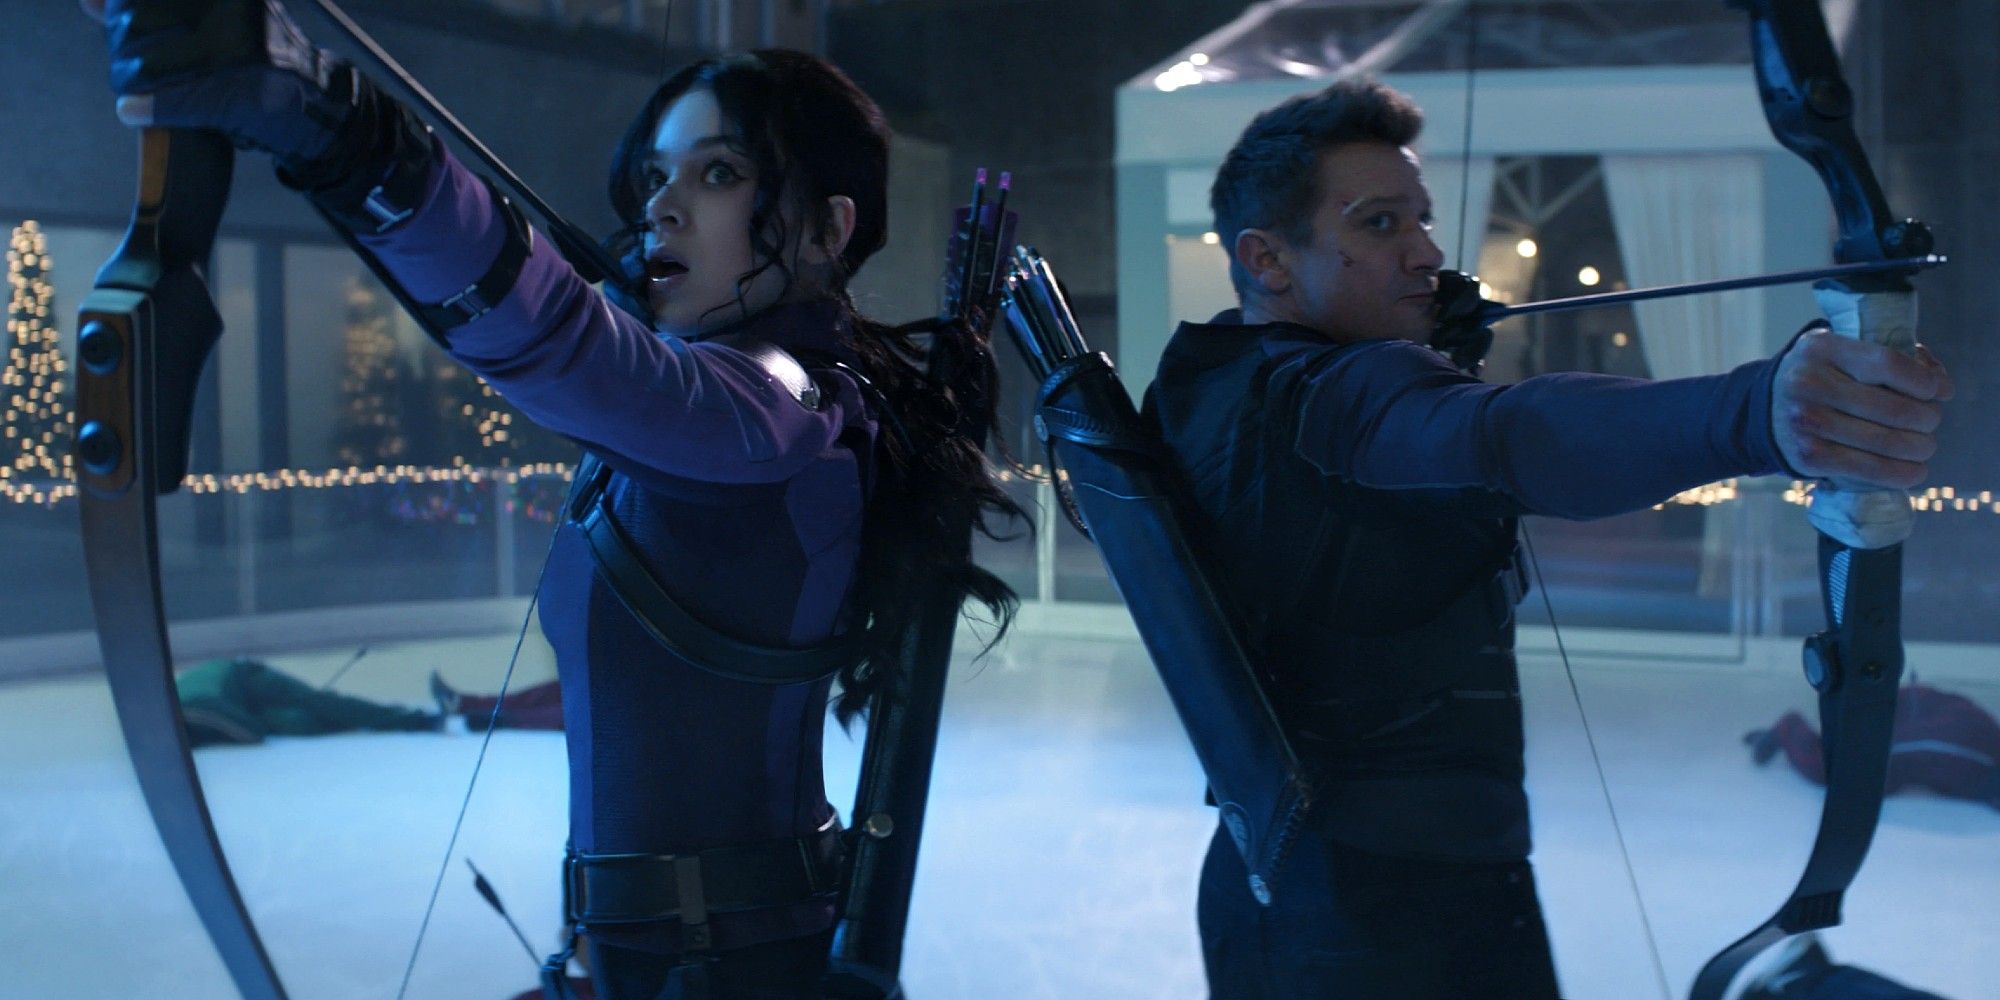 Hailee Steinfield and Jeremy Renner as Kate Bishop and Clint Barton in 'Hawkeye'